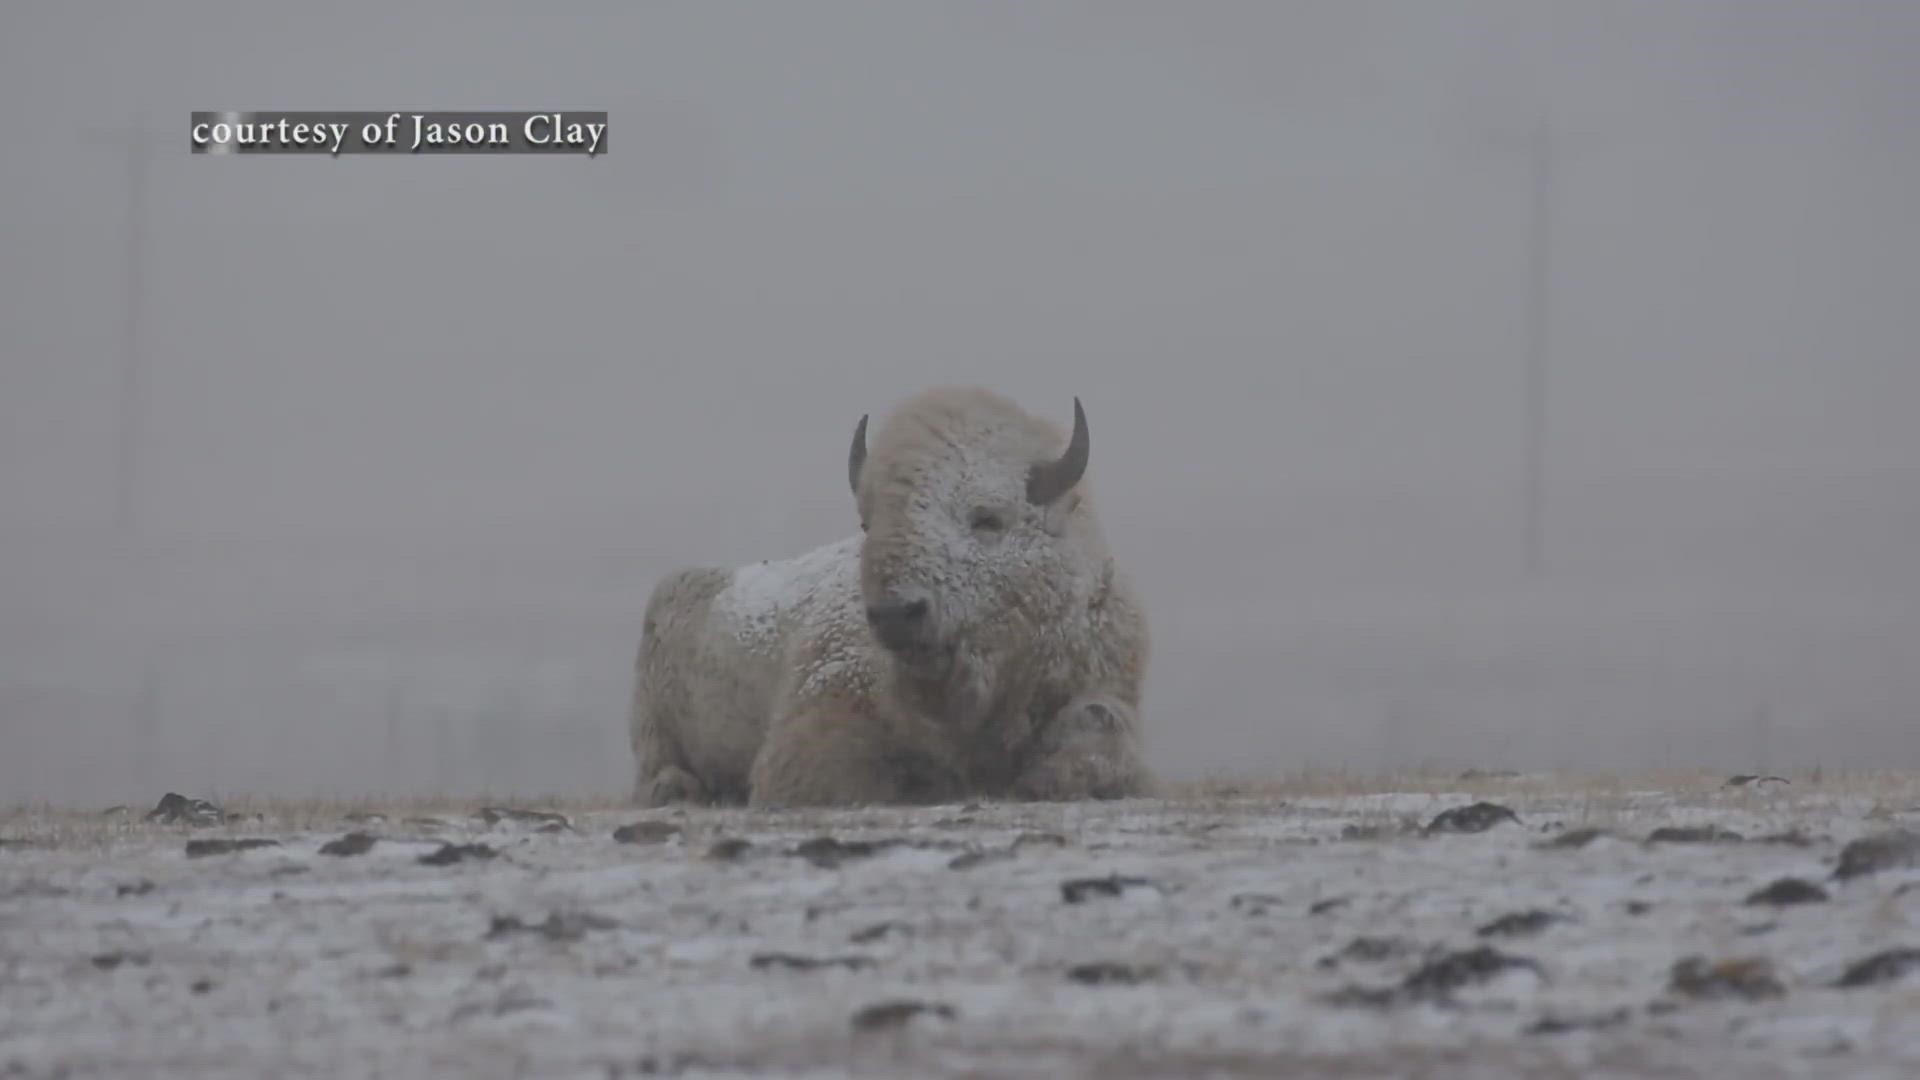 A bison on a ranch in South Park weathering the storm.
Credit: Jason Clay